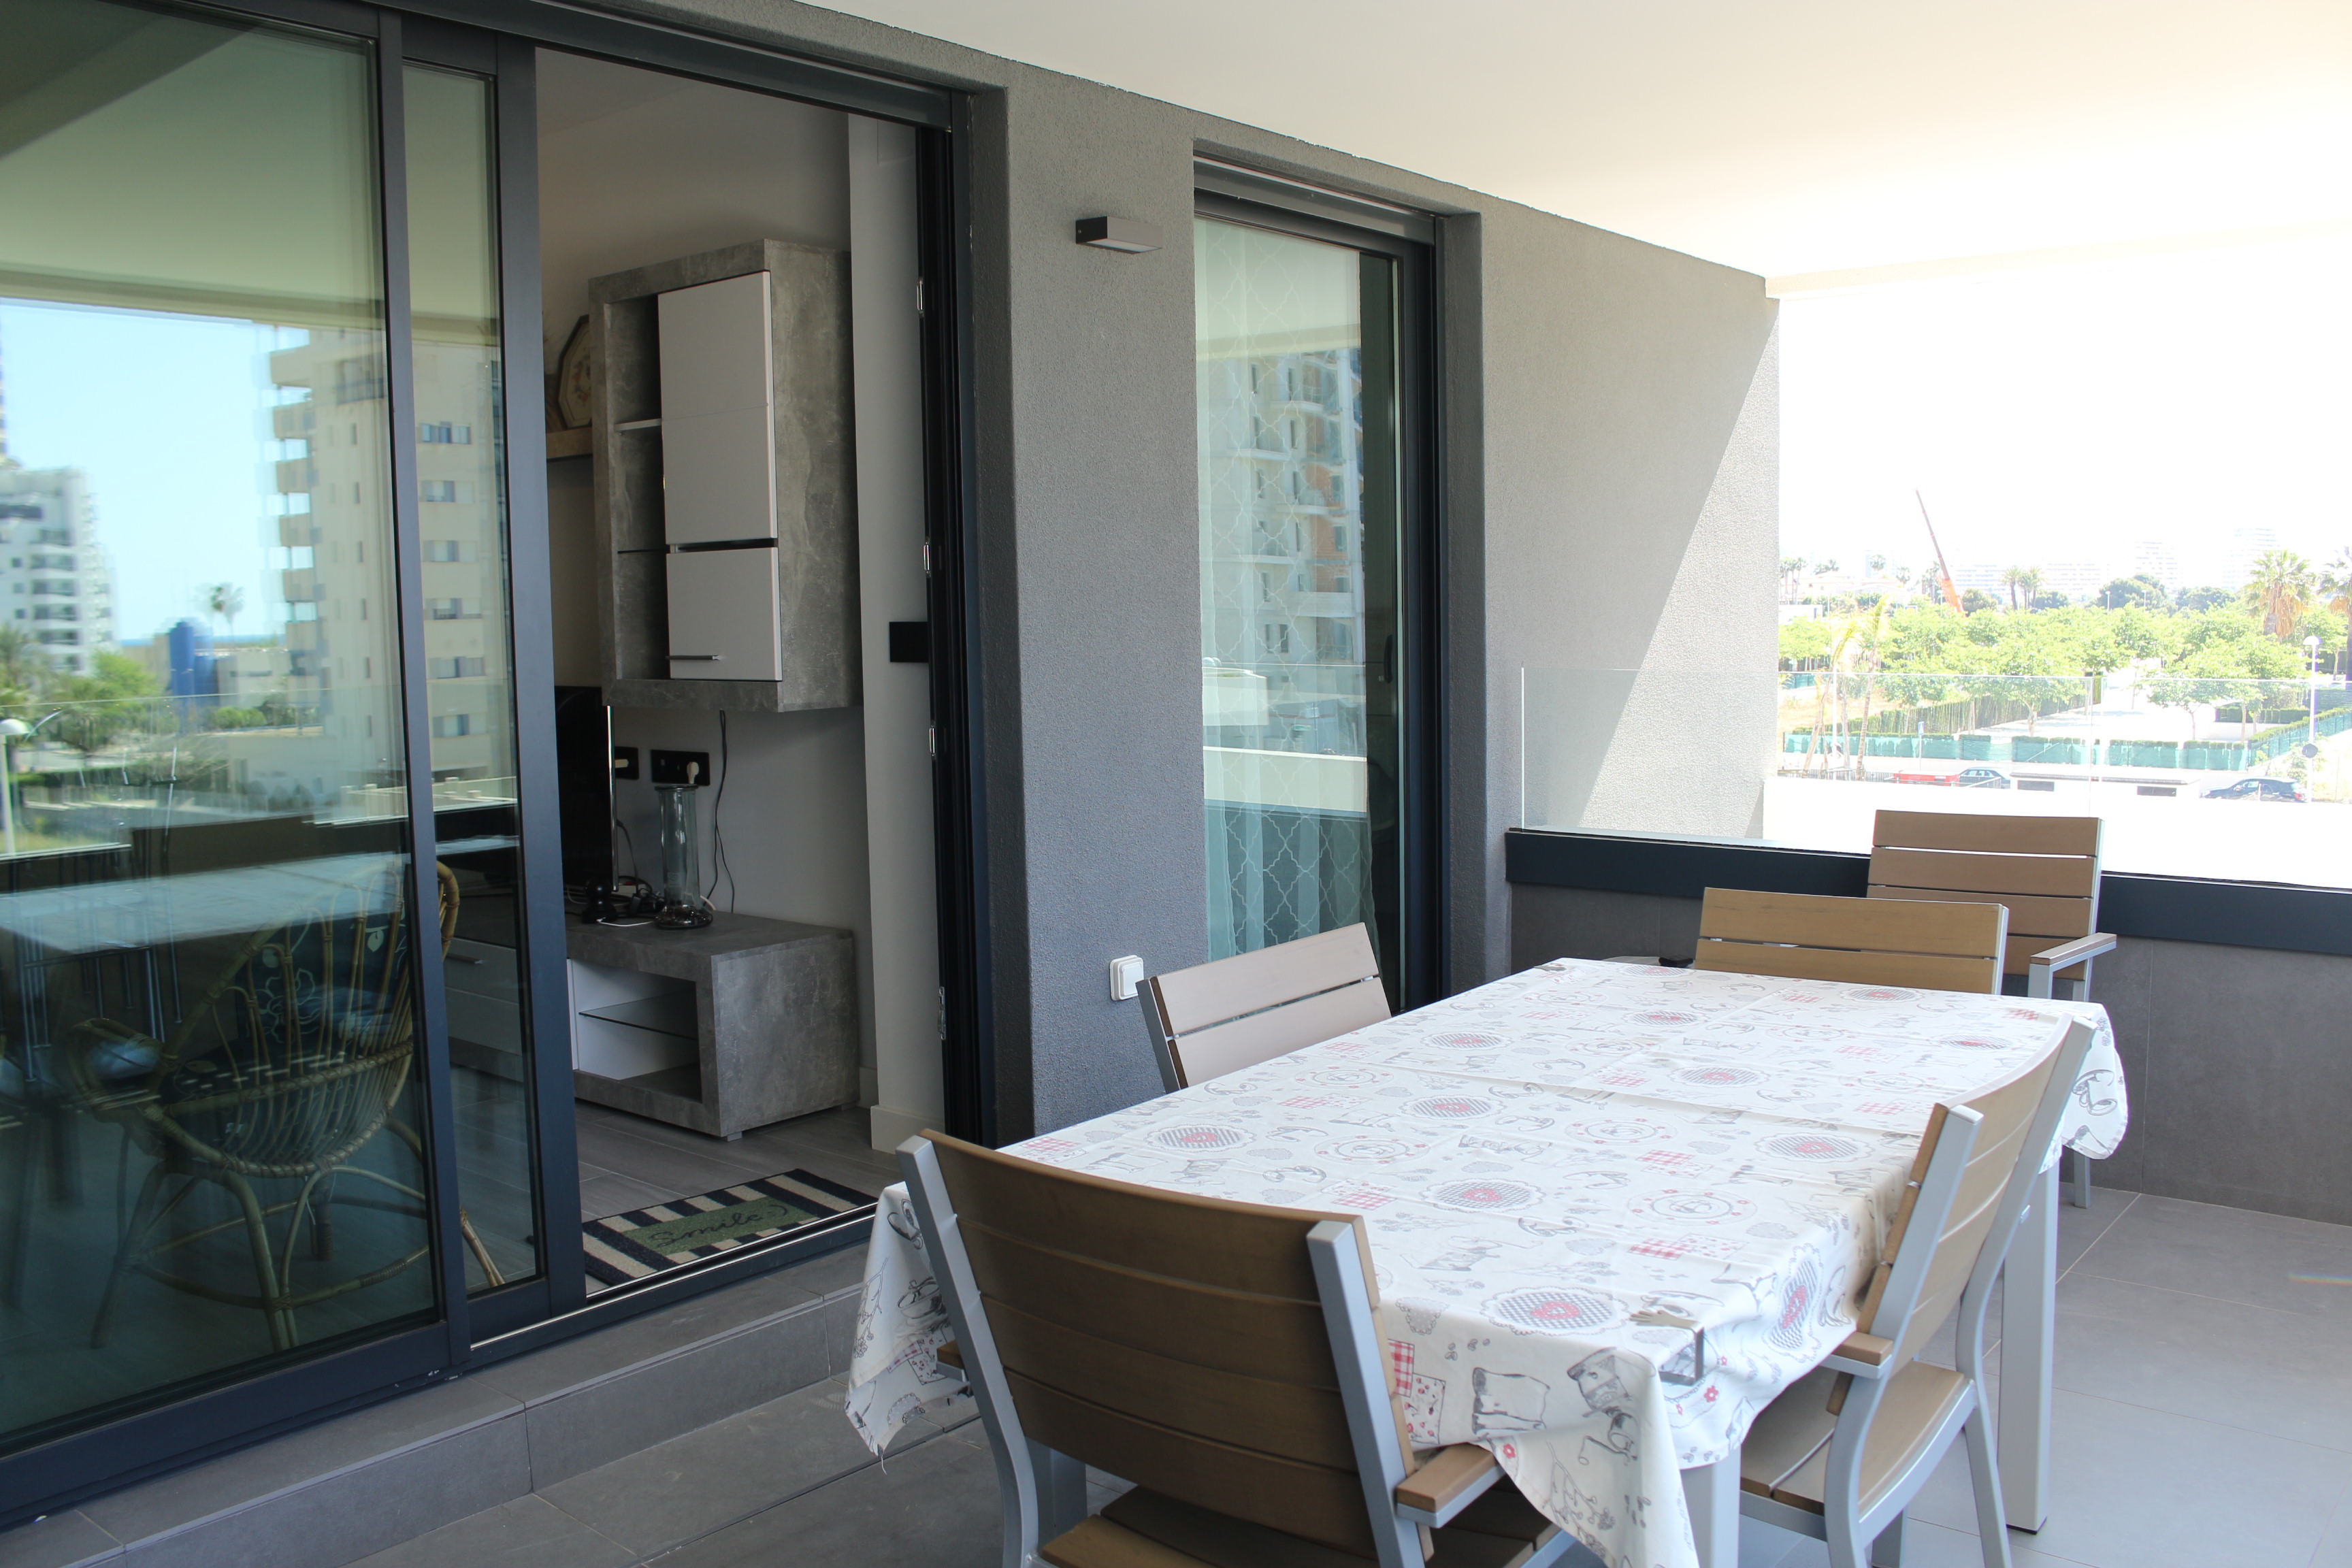 NEW APARTMENT FOR SALE IN CALPE, 3 BEDROOMS, RESIDENTIAL WITH LARGE GARDEN AREAS.